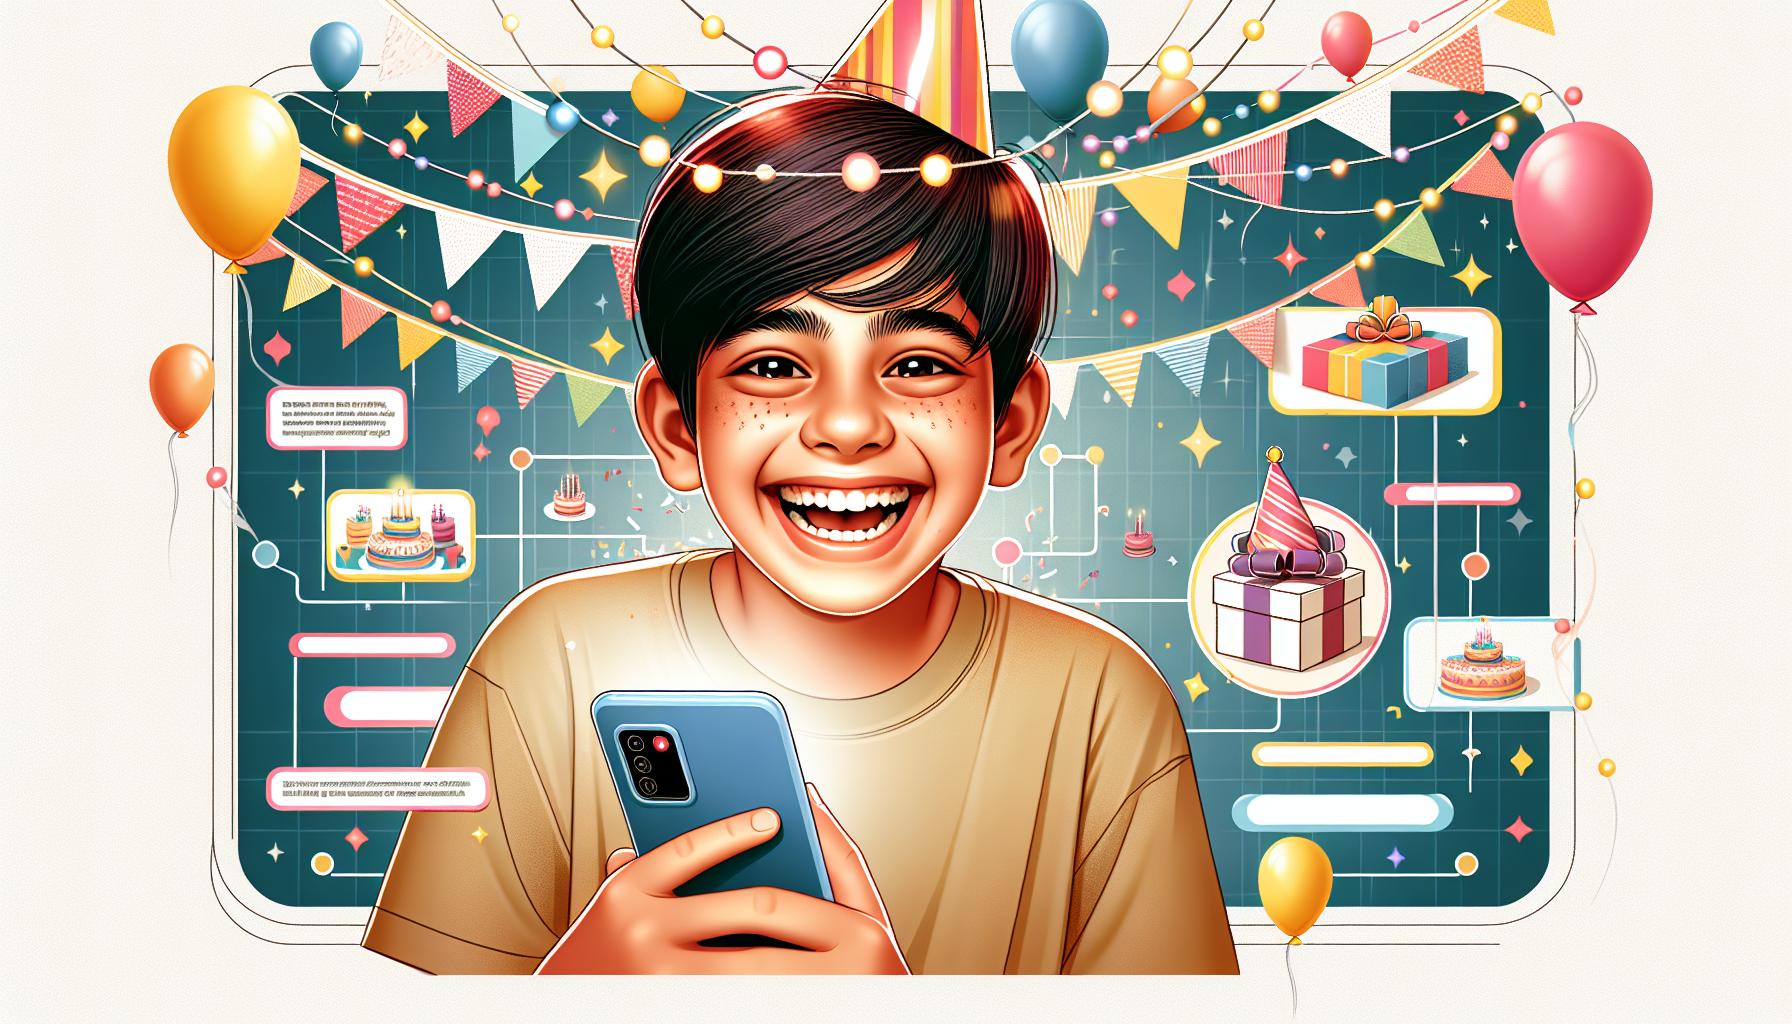 Top Funny Nephew Birthday Wishes: Teen Laughs Galore